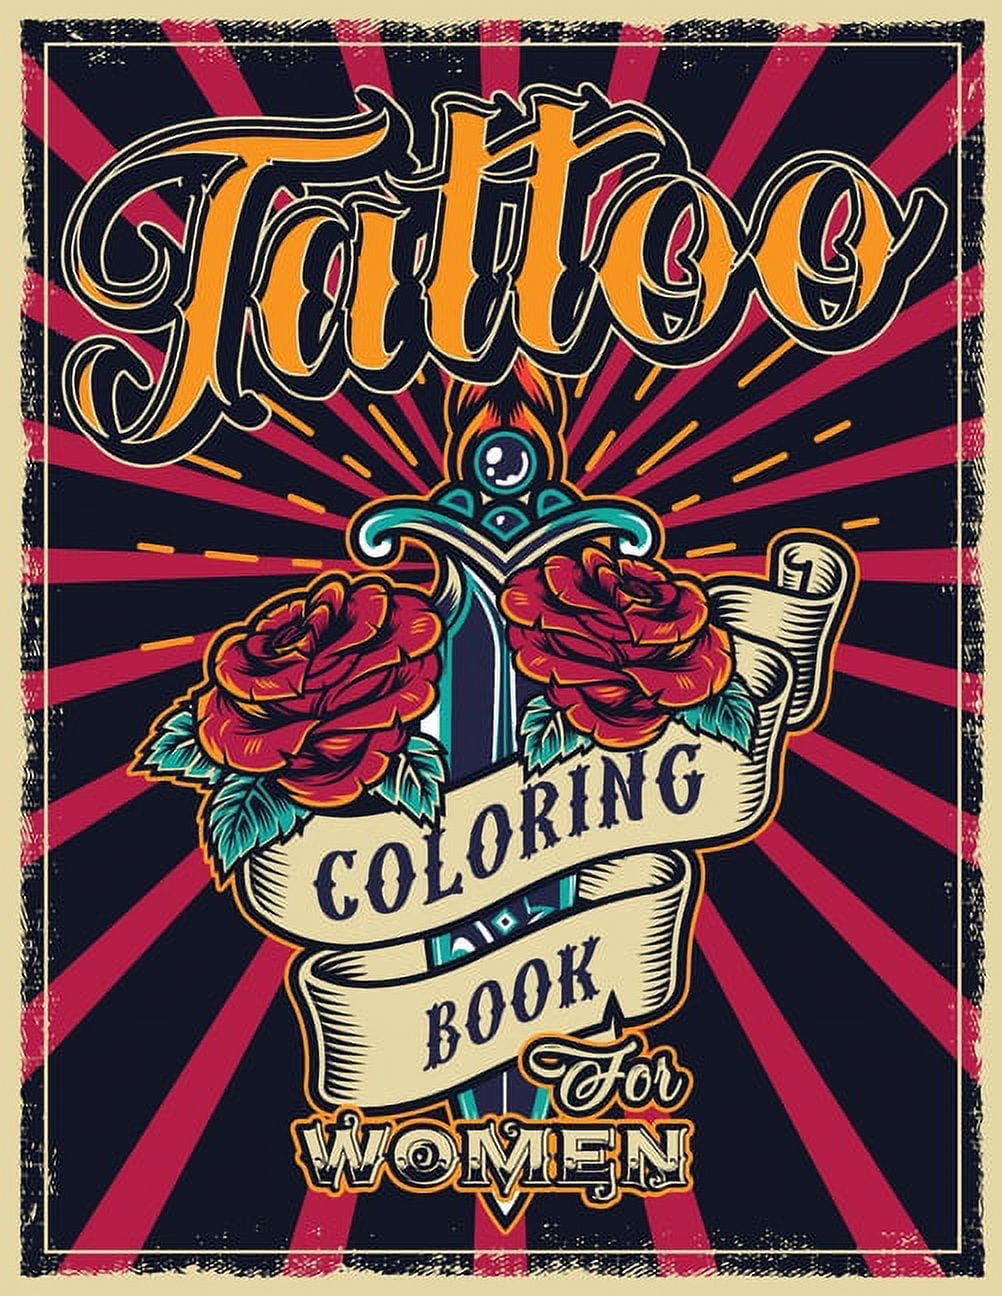 Animal Tattoo Coloring Book: Big Coloring Book for Adults Teen To Stress  Relief , Perfect Gift For Him Her Men Women Mom And Dad For Christmas  Birthda - Literatura obcojęzyczna - Ceny i opinie 